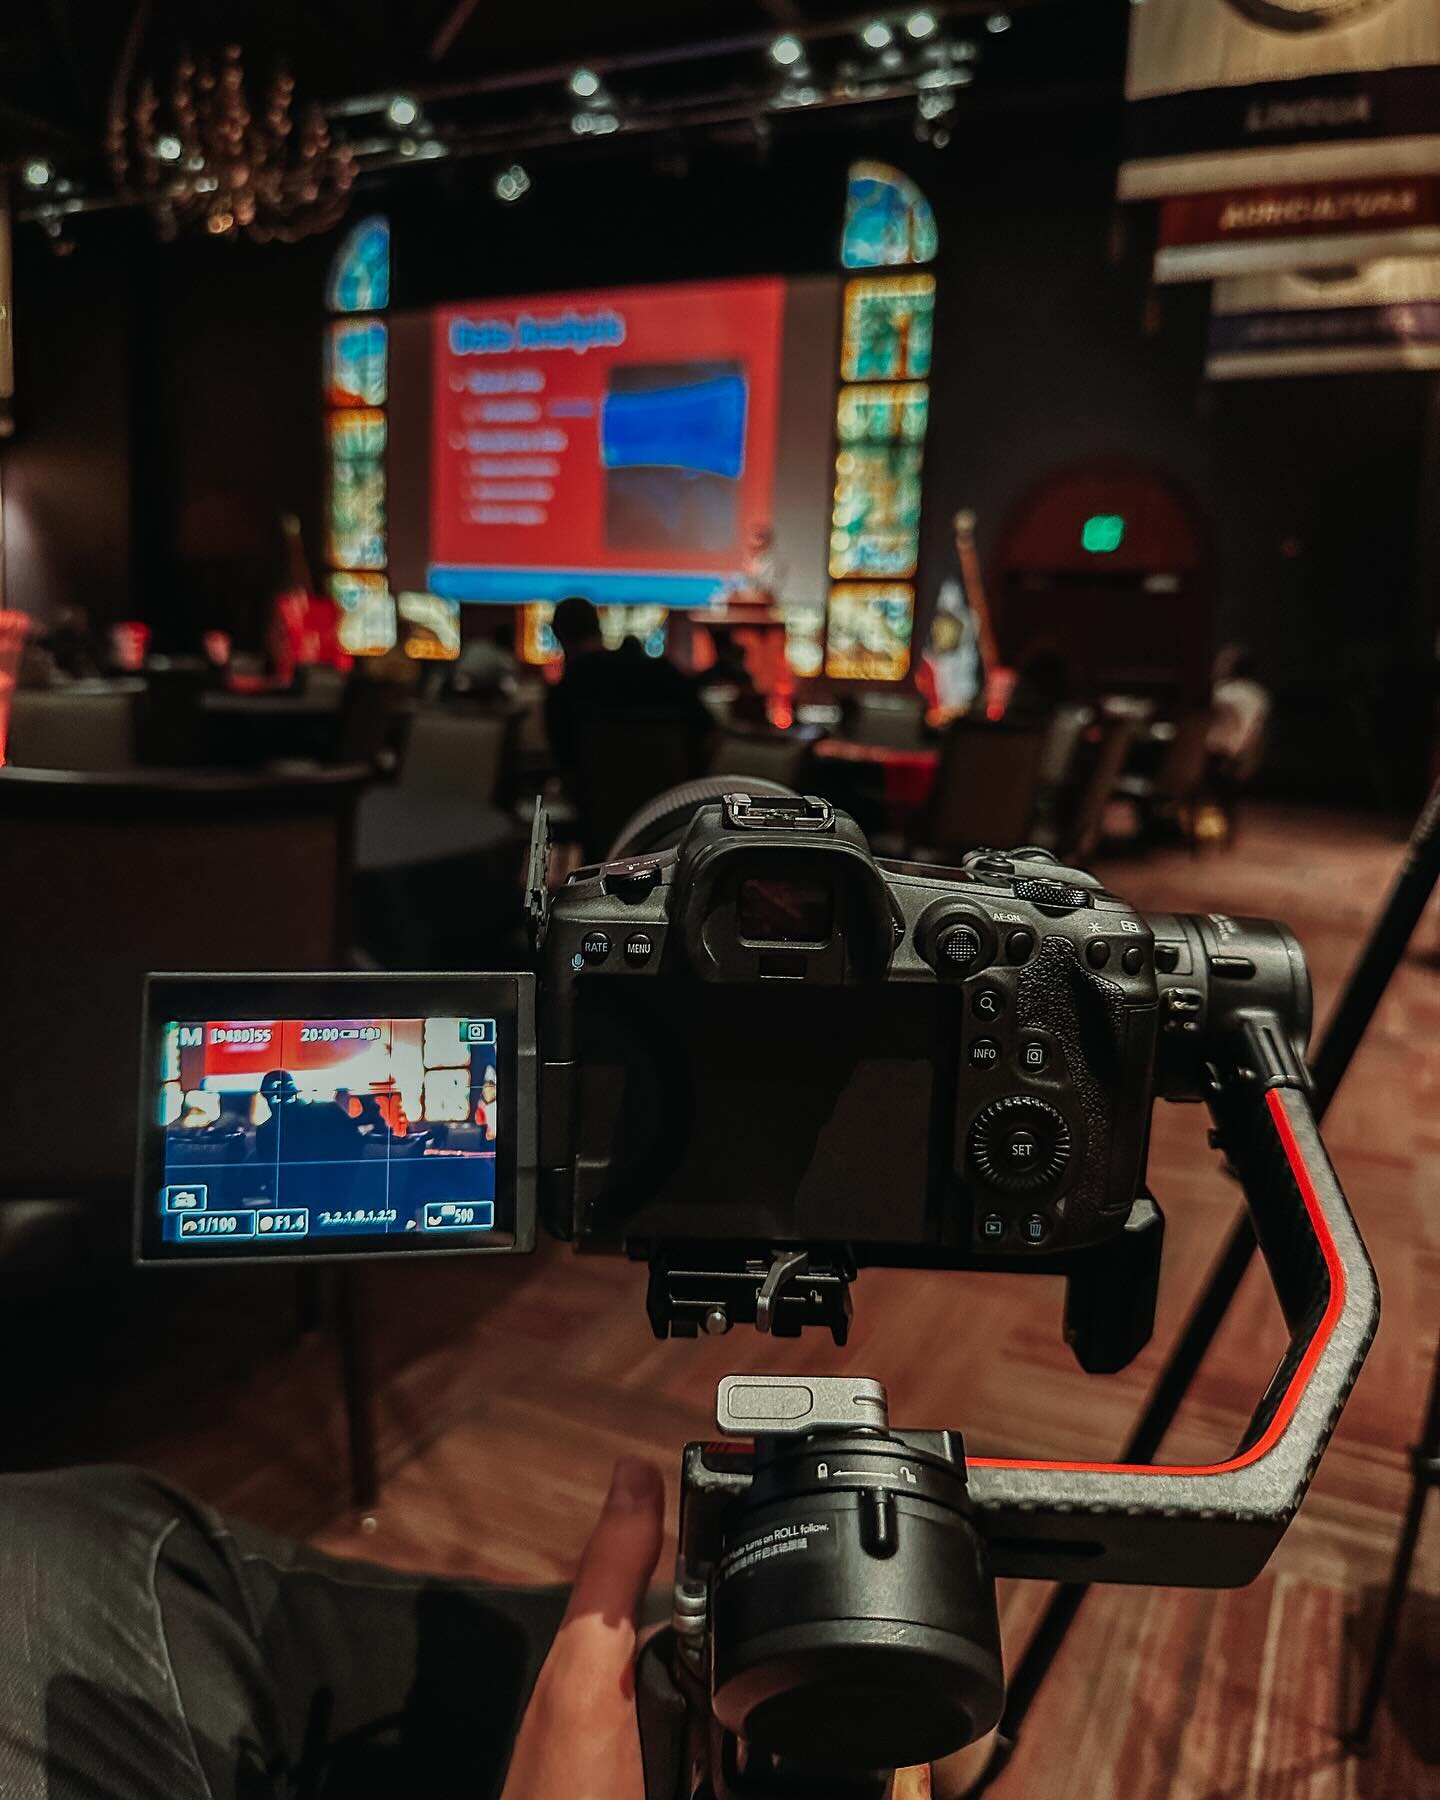 Had a lot of fun shooting for this year&rsquo;s SUU VR Summit! Super cool hearing from people from all over the country about how they are using VR, AR &amp; new tech in business and education. Can&rsquo;t wait to watch this project progress!